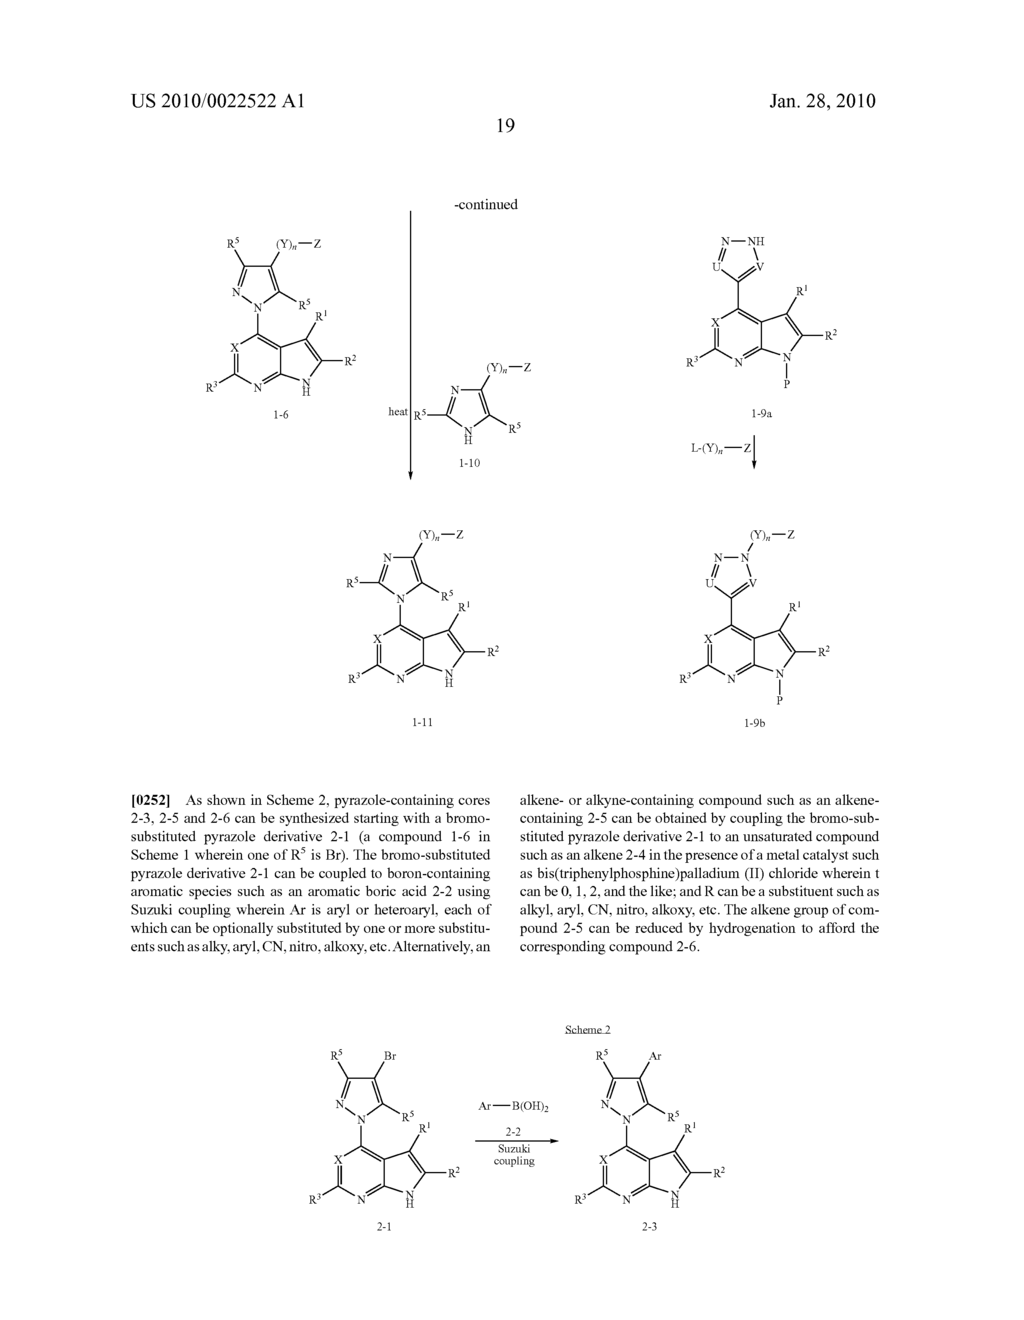 HETEROARYL SUBSTITUTED PYRROLO[2,3-b]PYRIDINES AND PYRROLO[2,3-b]PYRIMIDINES AS JANUS KINASE INHIBITORS - diagram, schematic, and image 20